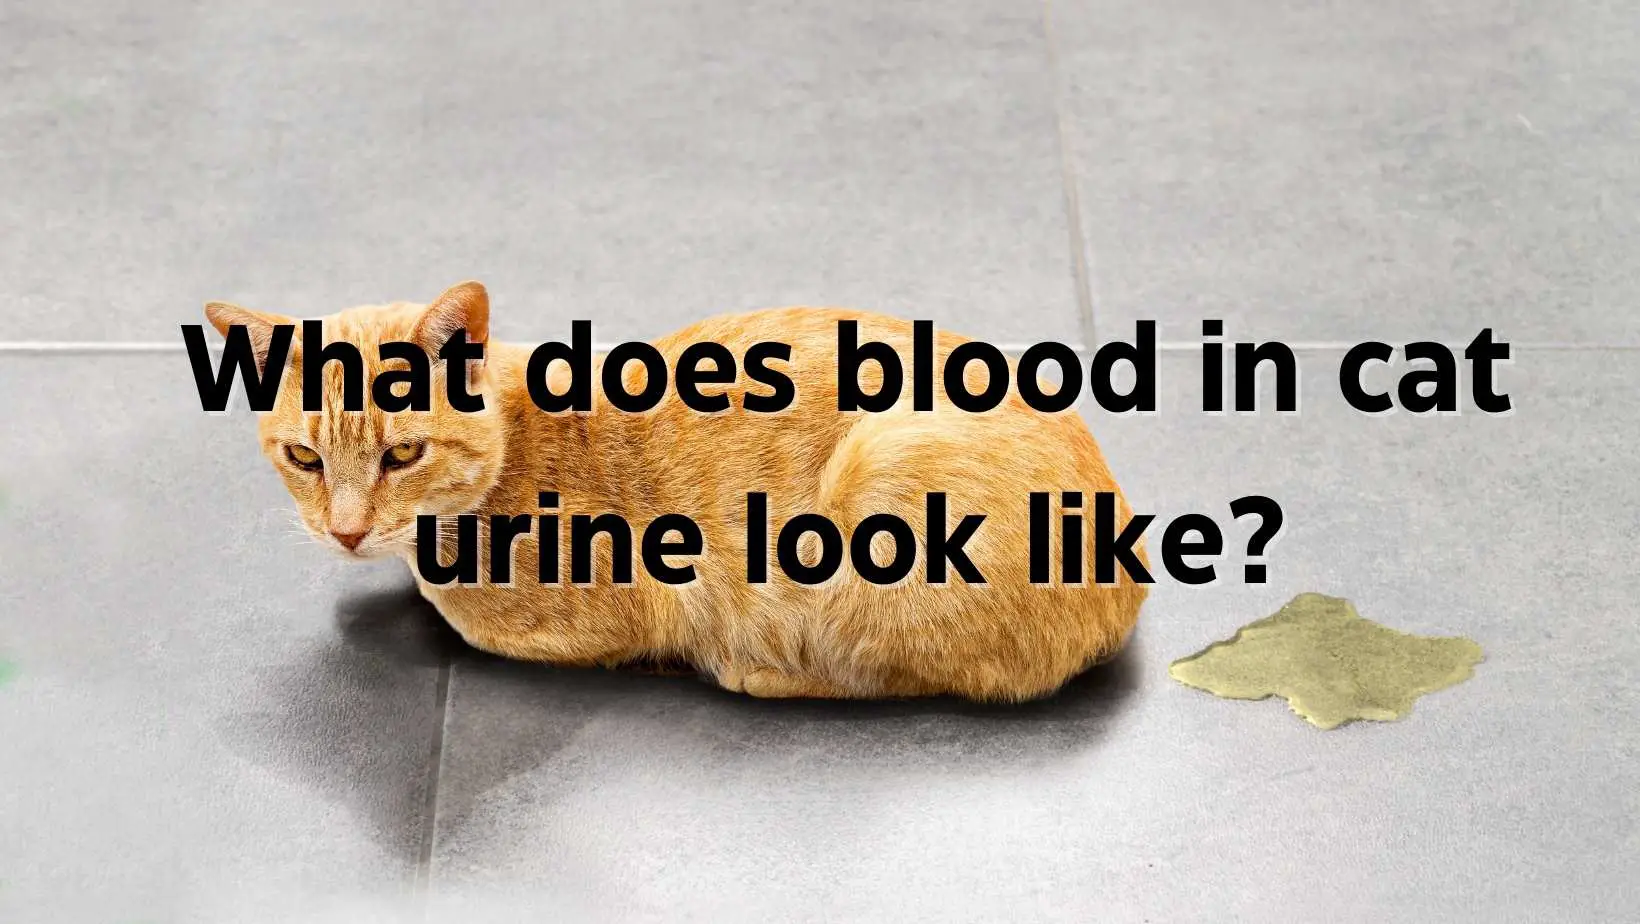 What does blood in cat urine look like?